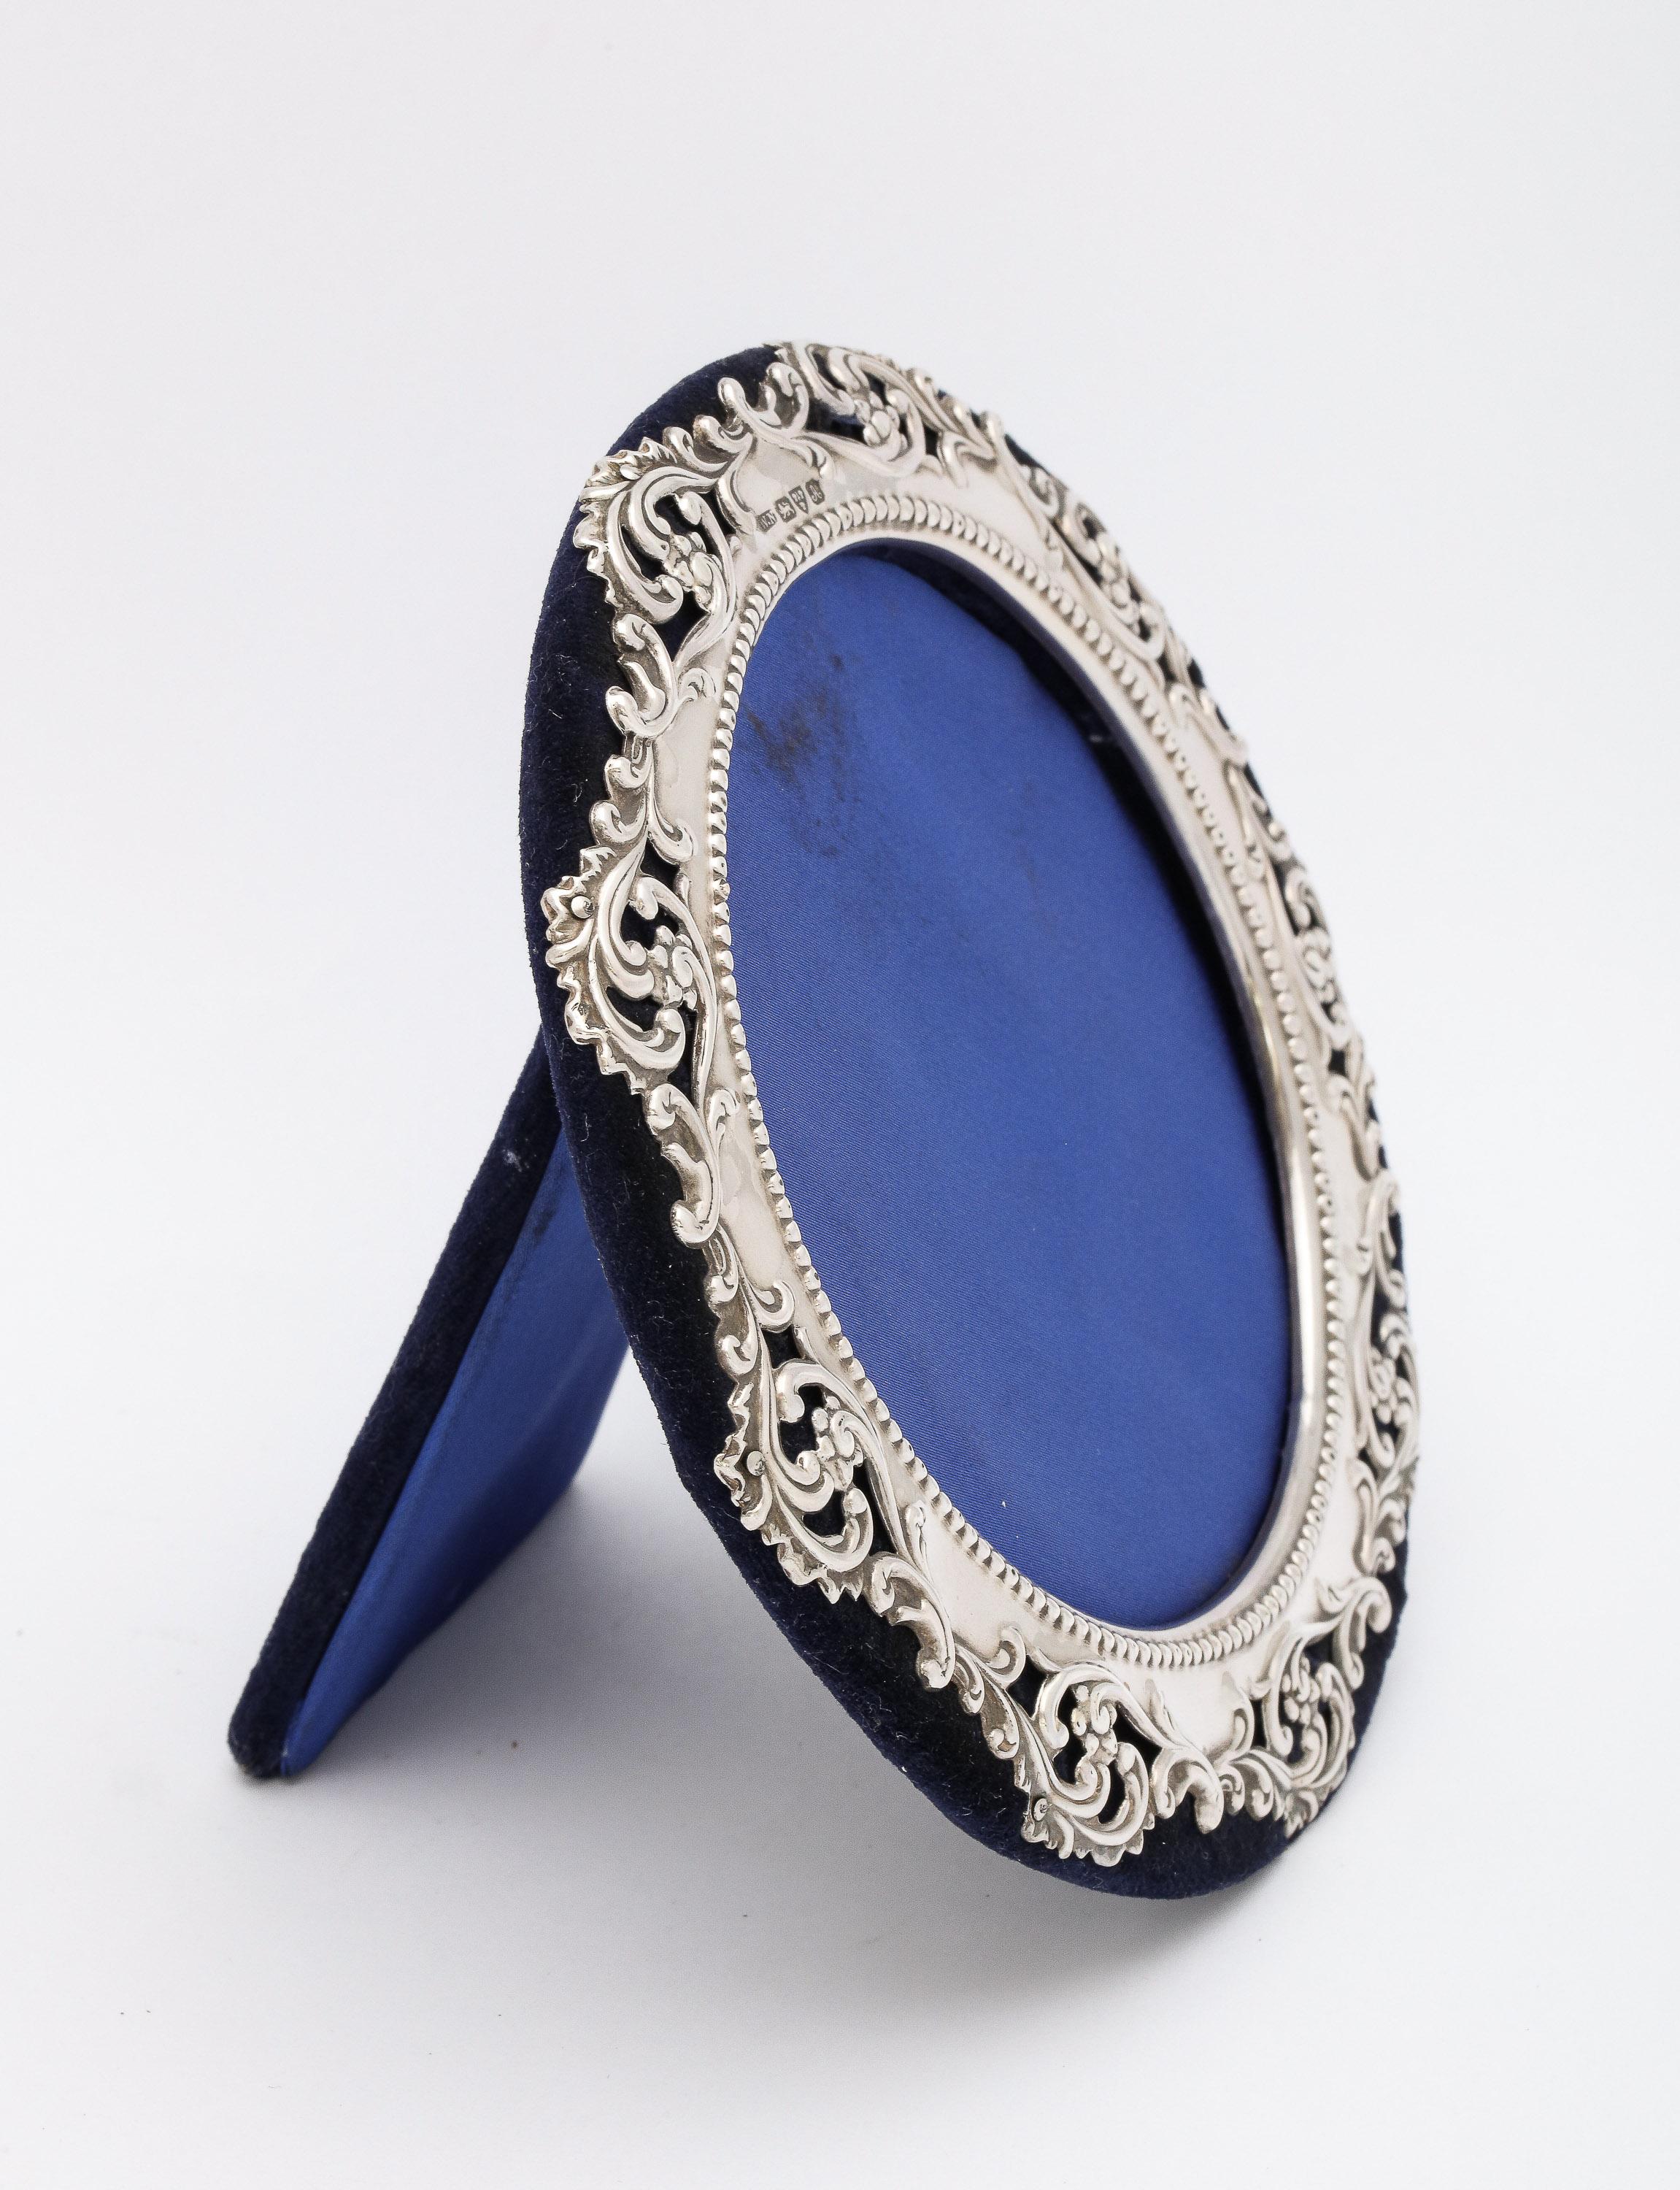 Early 20th Century Edwardian Sterling Silver Round Picture Frame Mounted on Dark Blue Velvet